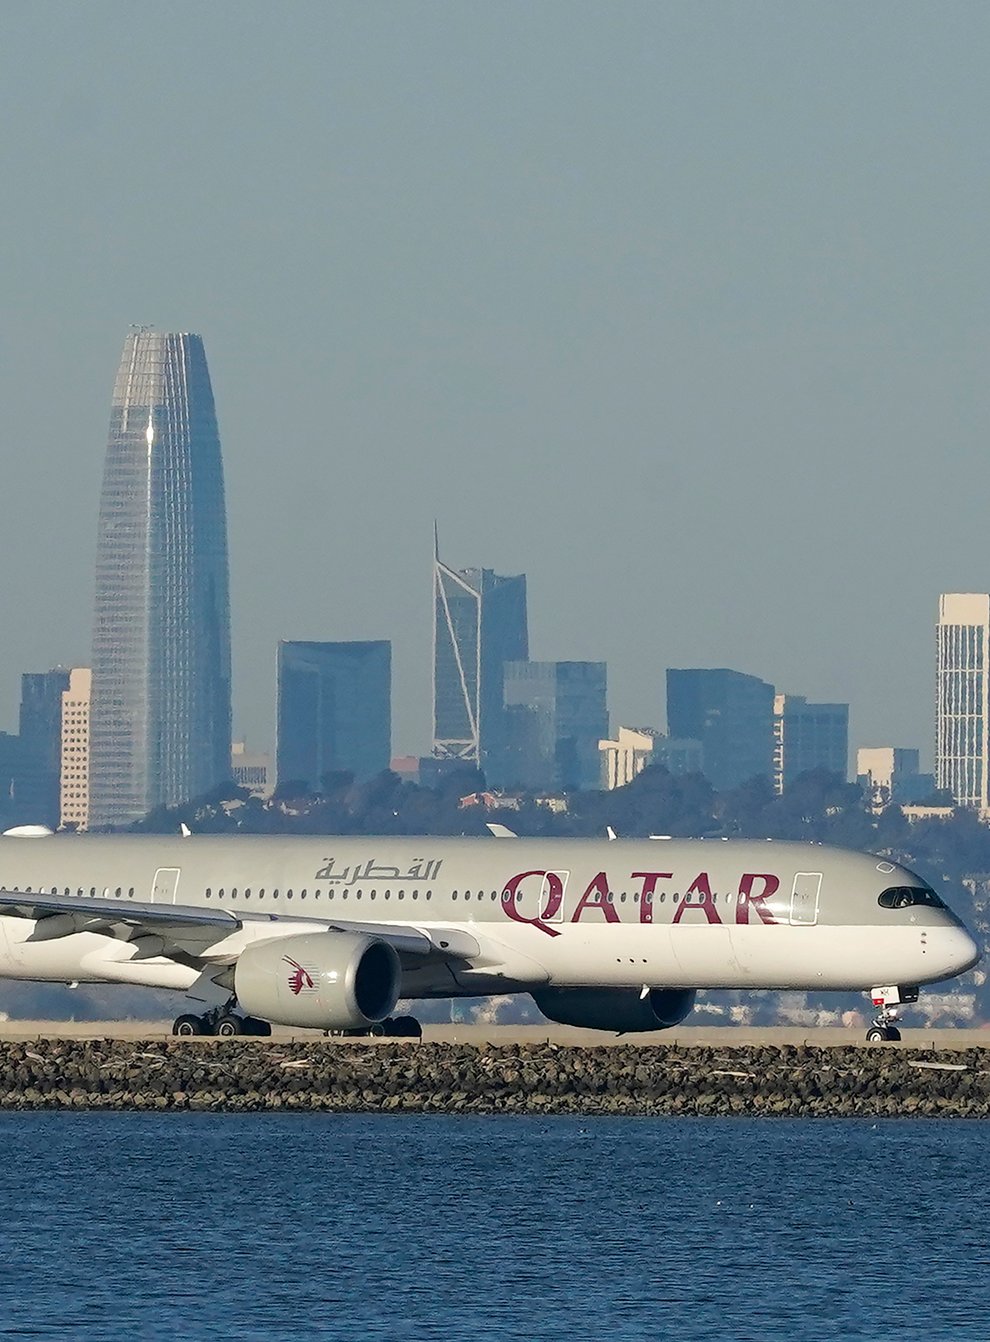 The airline is based in the energy-rich Gulf Arab state of Qatar (Jeff Chiu/AP)